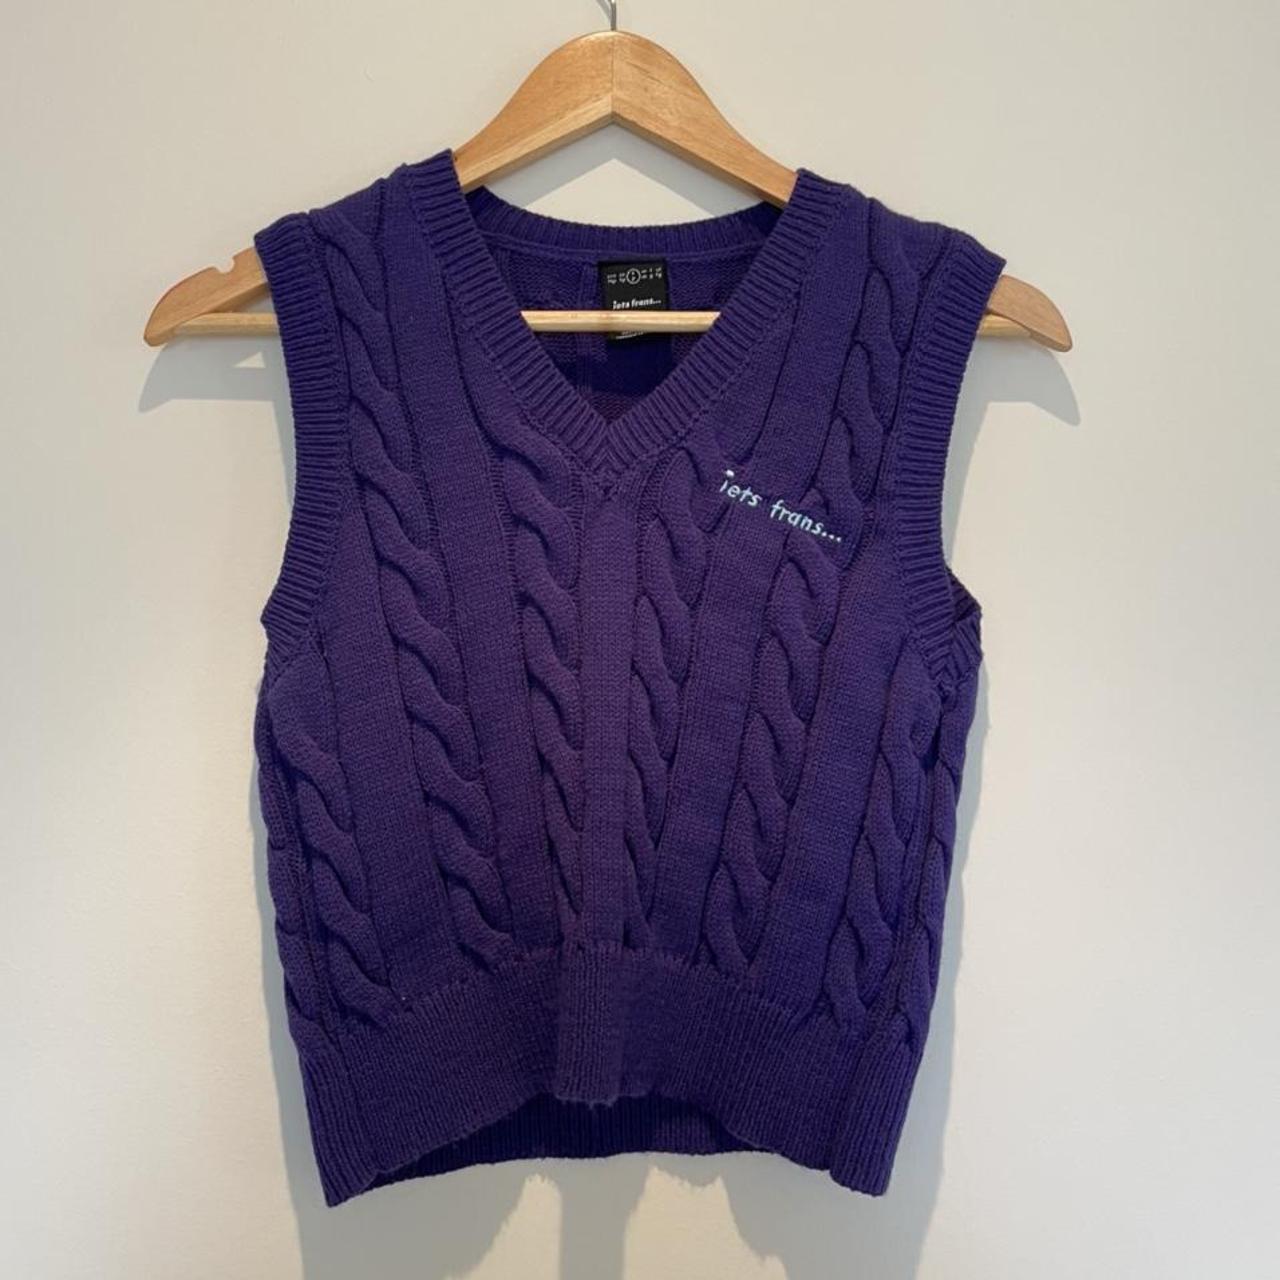 URBAN OUTFITTERS iets frans Cable knit sweater vest... - Depop